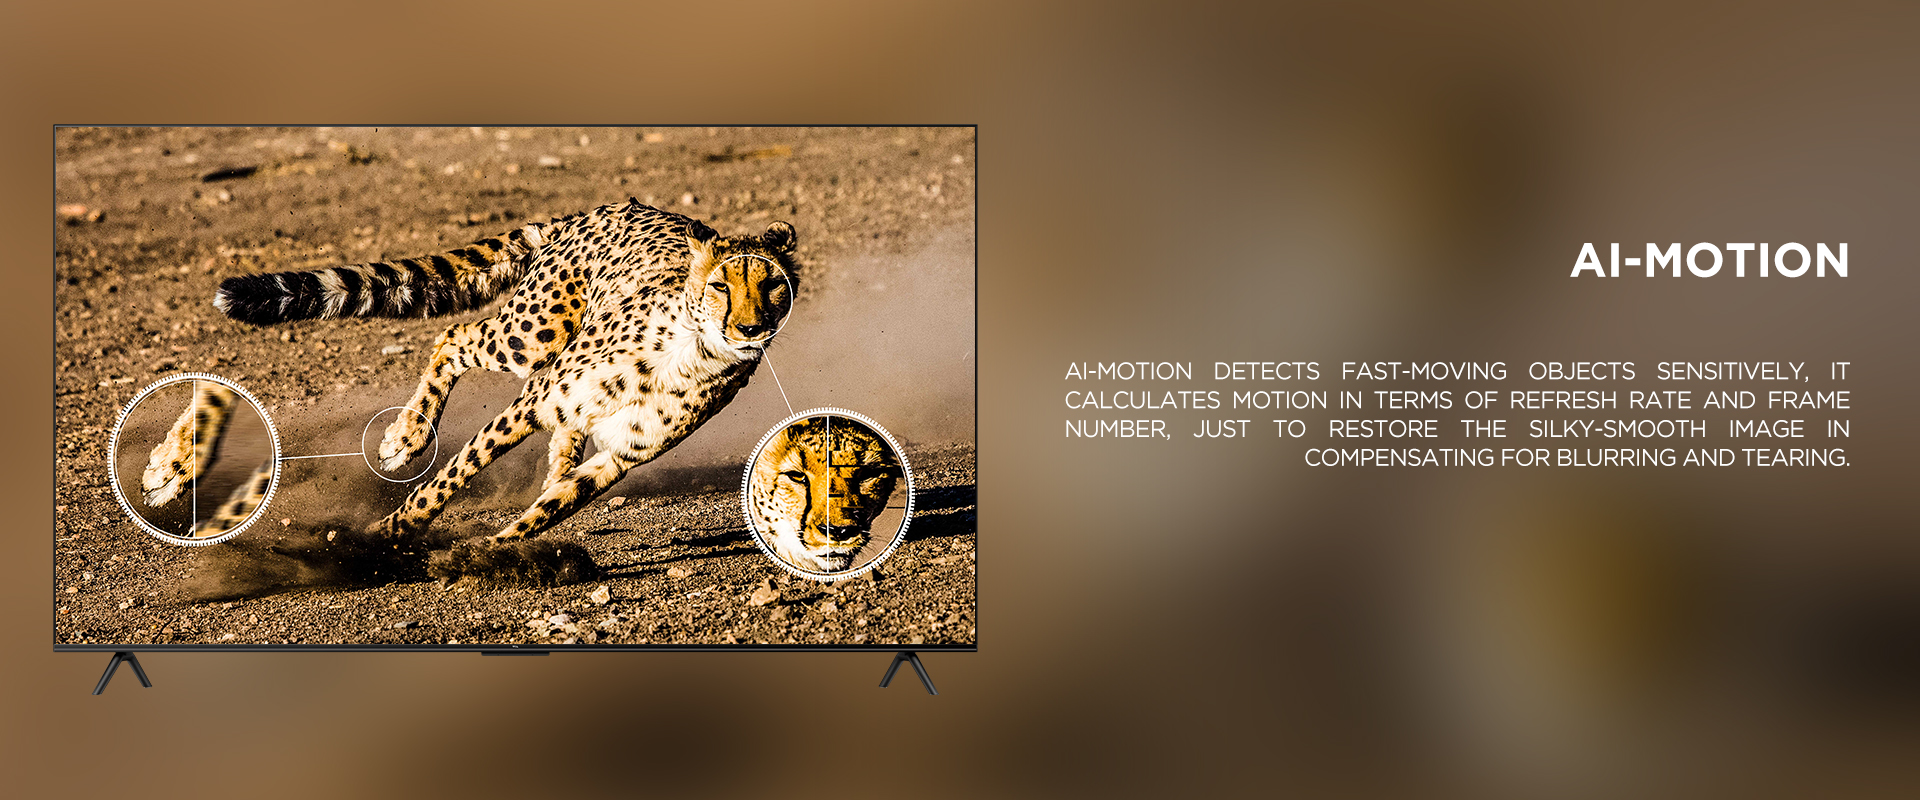 Ai-MOTION - Ai-Motion detects fast-moving objects sensitively, it calculates motion in terms of refresh rate and frame number, just to restore the silky-smooth image in compensating for blurring and tearing.